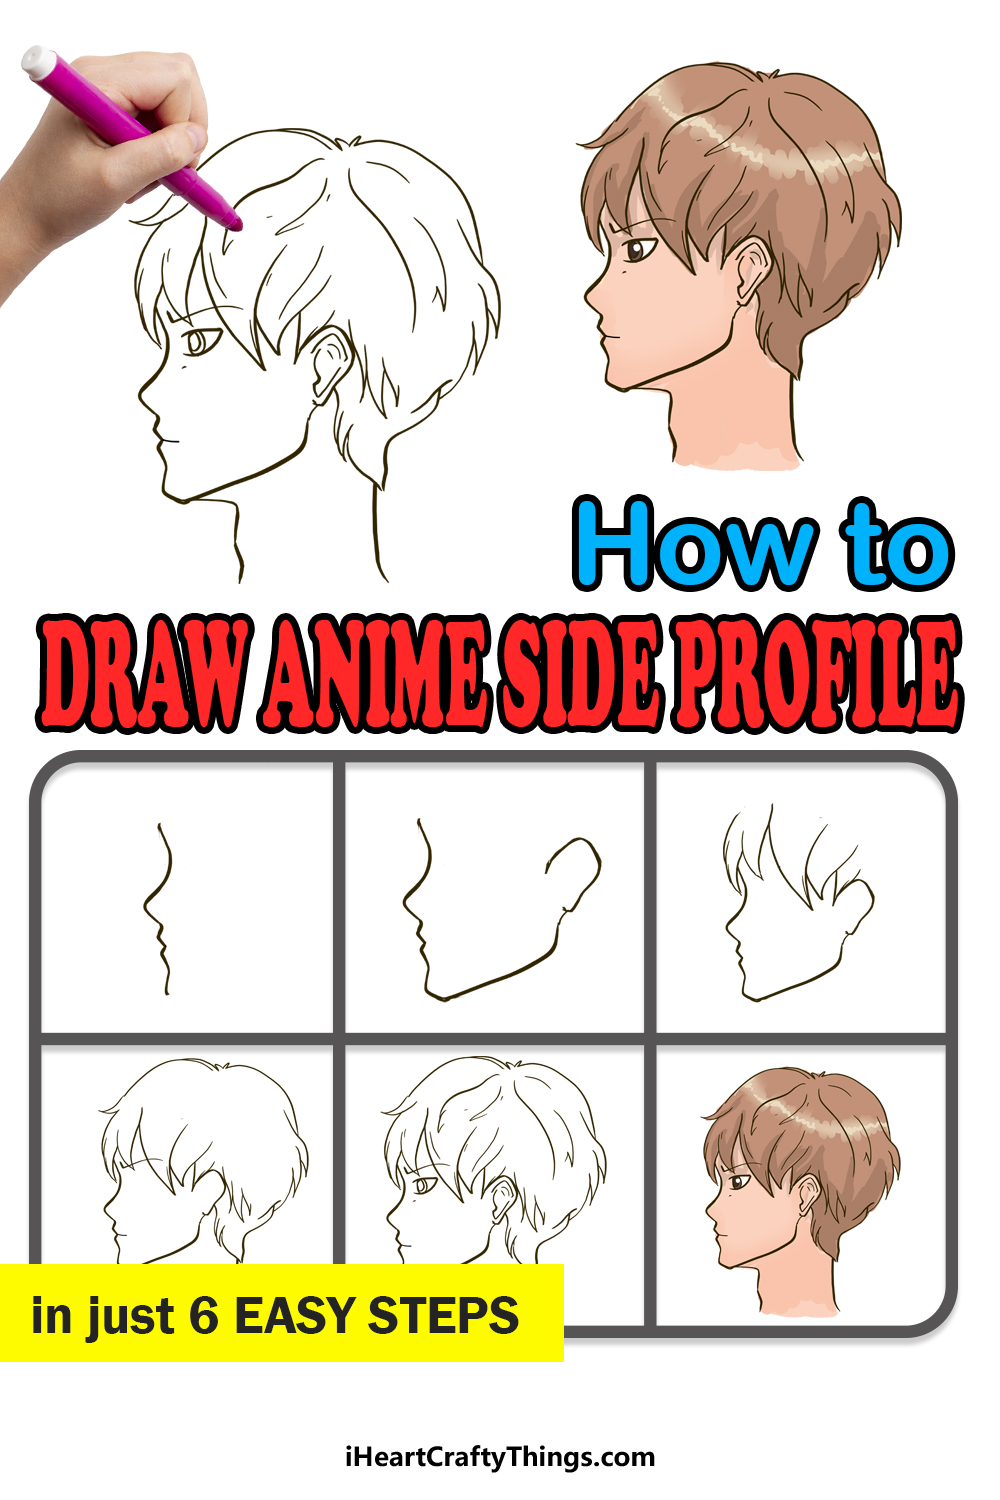 How to Draw An Anime Side Profile step by step guide